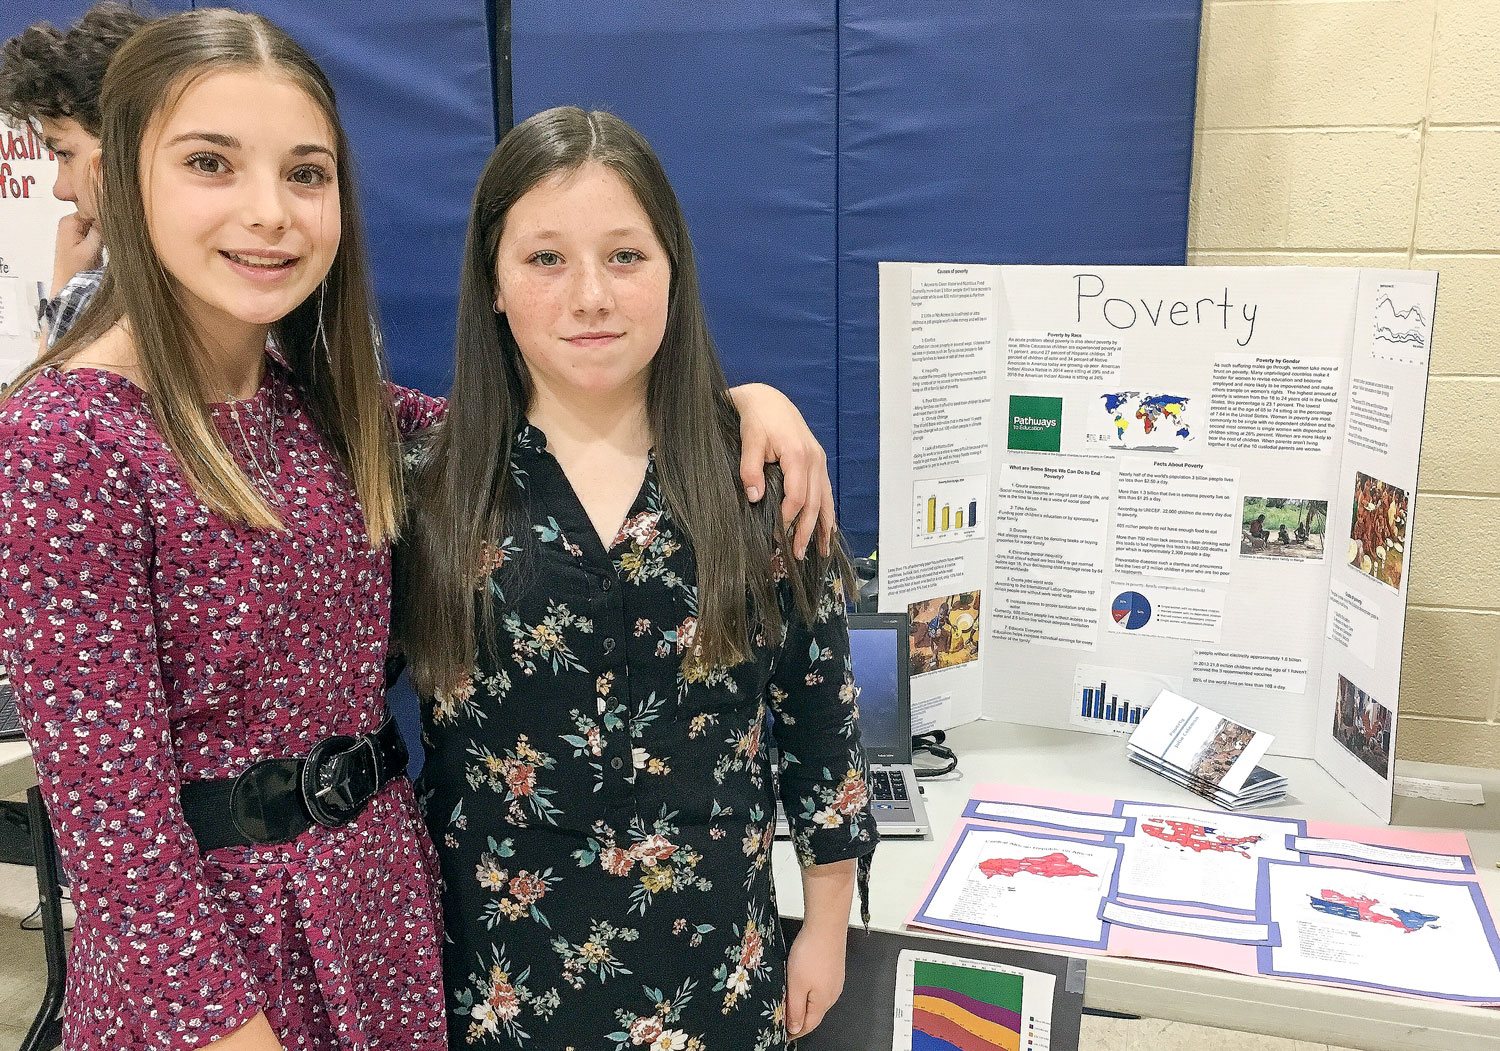 Jaida and Julia answered questions around the causes of childhood poverty around the world.